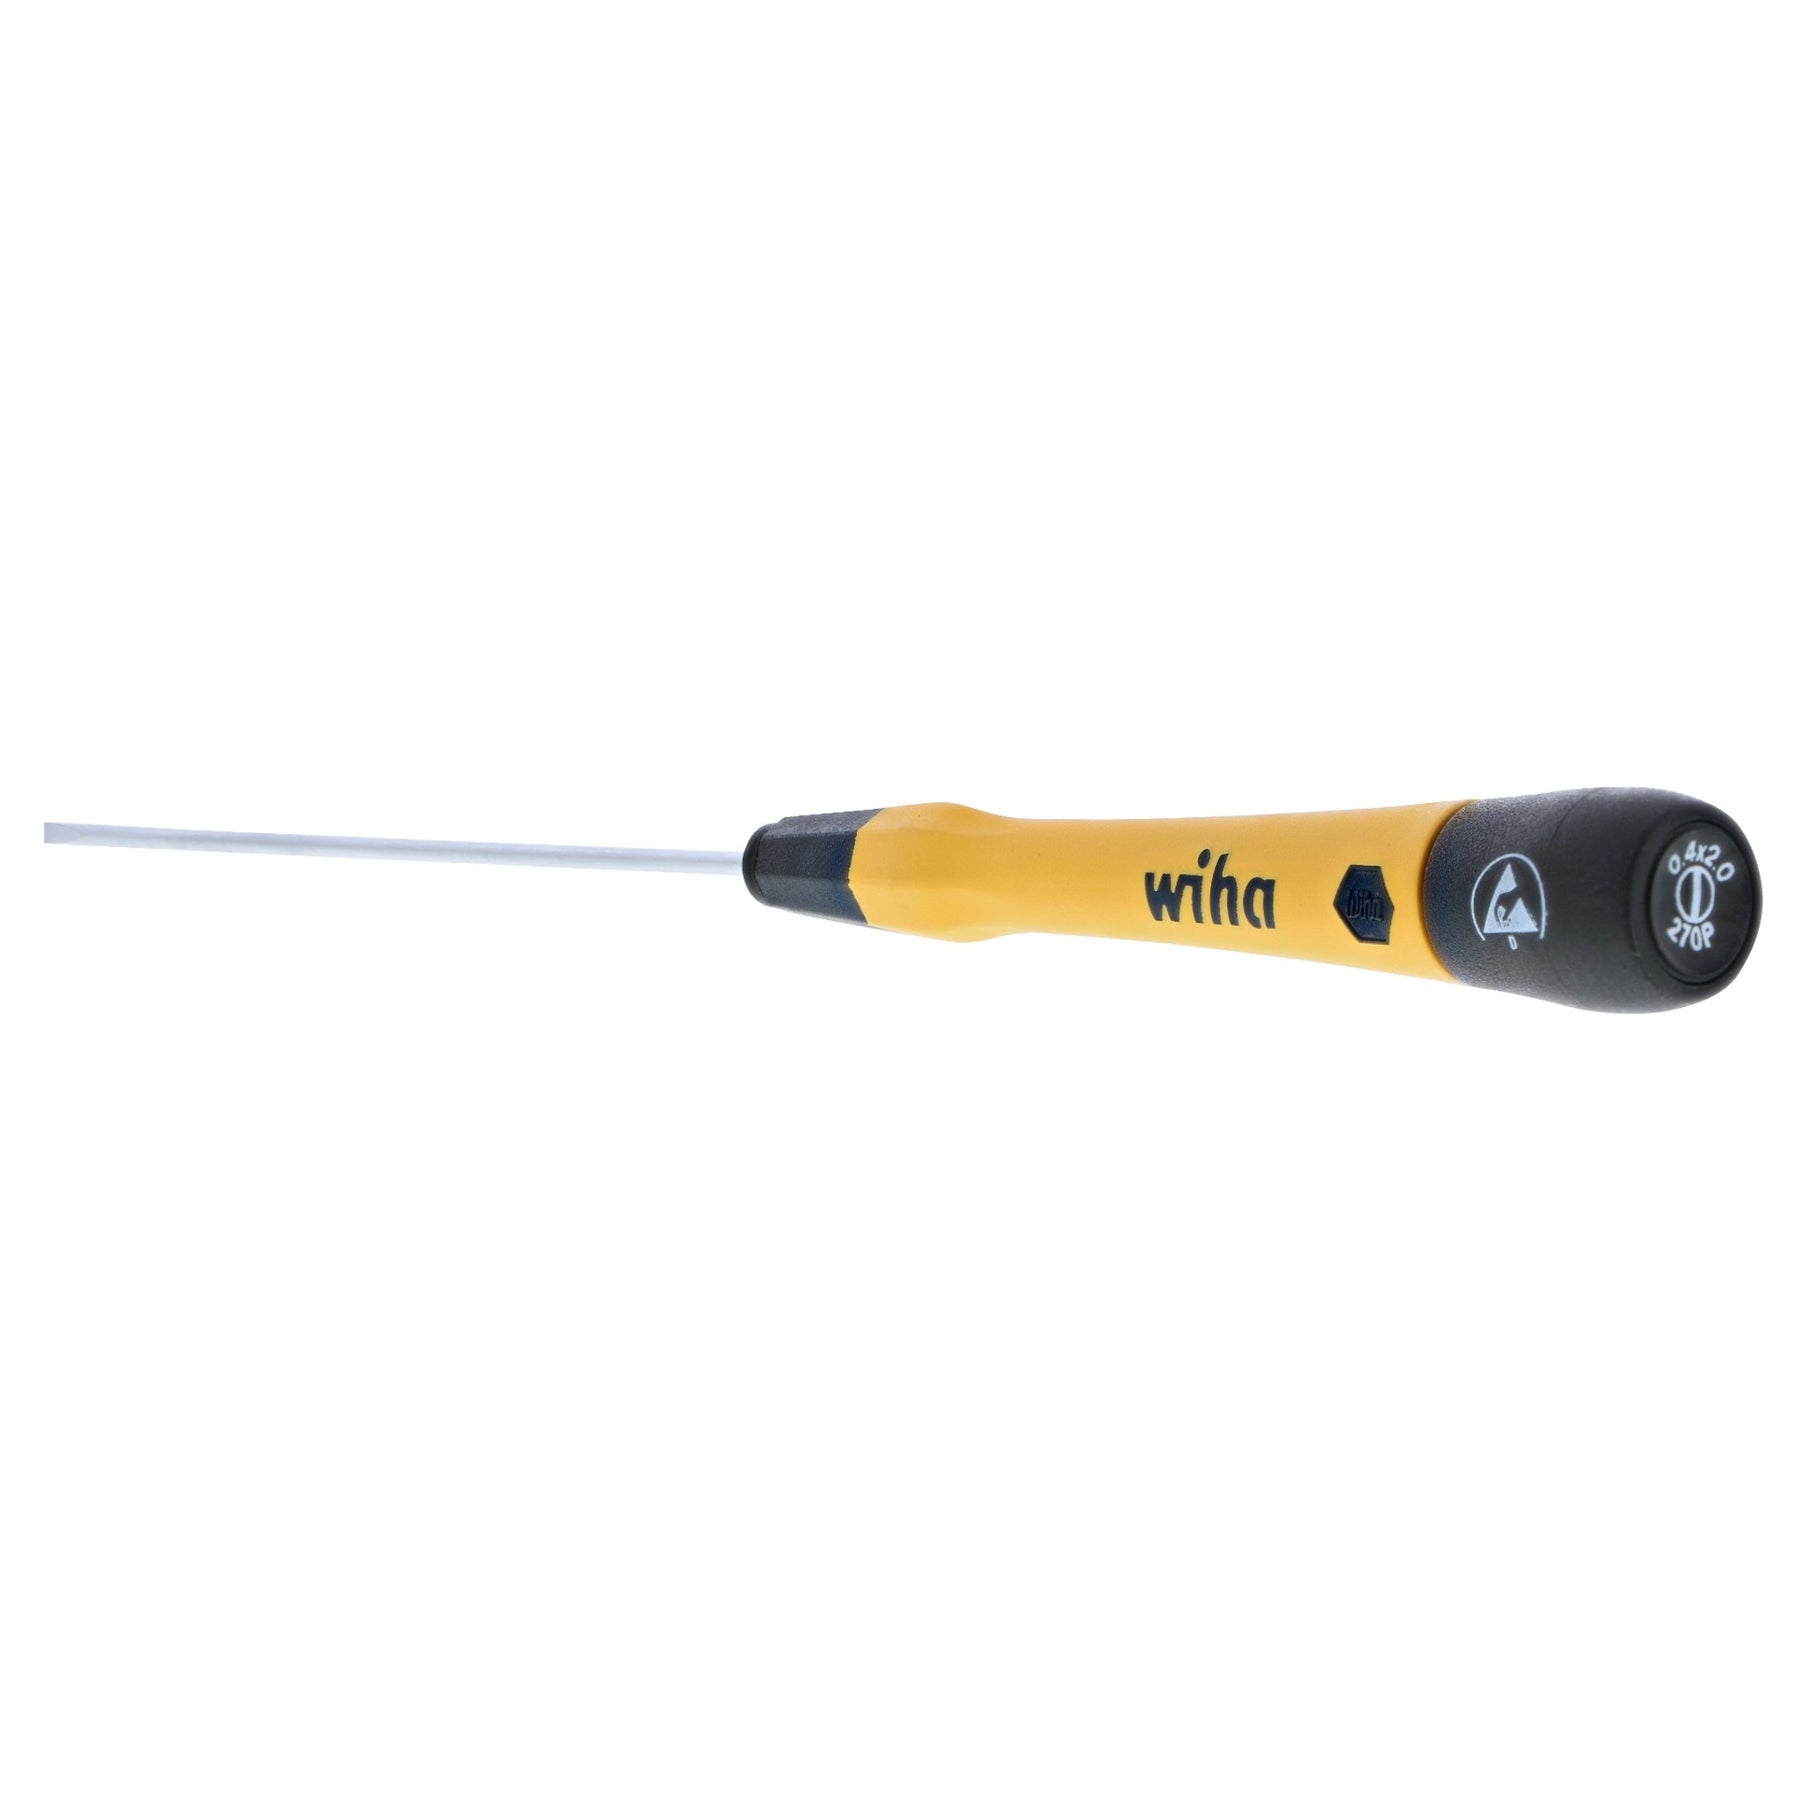 ESD Safe PicoFinish Precision Screwdriver - Slotted 2.0mm x 100mm